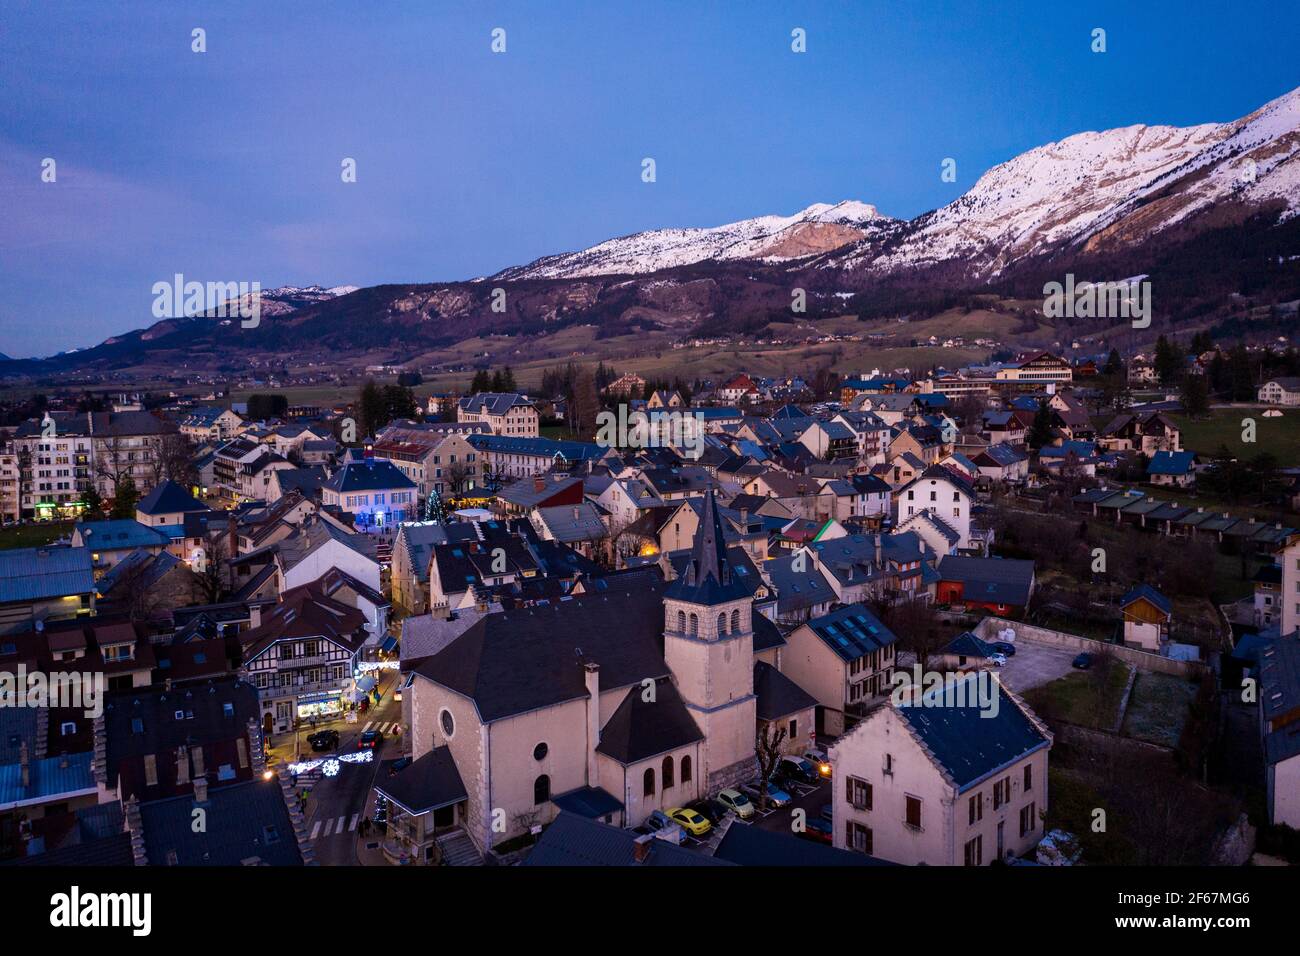 Evening drone view on mountain village in Vercors mountains, France. Snow layer covering mountain ridge in background. Stock Photo